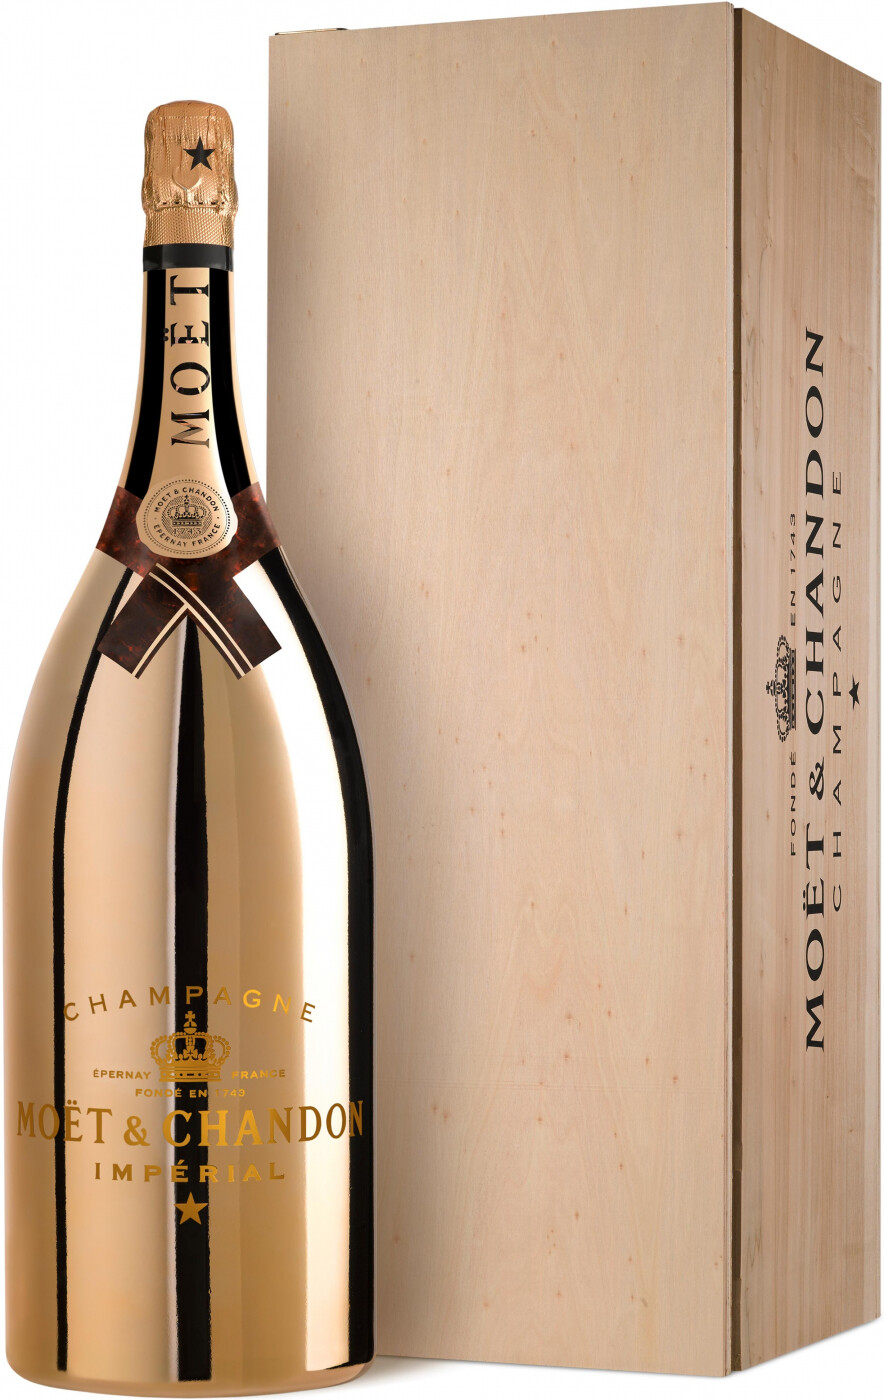 MOËT & CHANDON IMPÉRIAL BRUT SPECIAL EDITION BRIGHT NIGHT 6L - Online  Liquor Store NYC